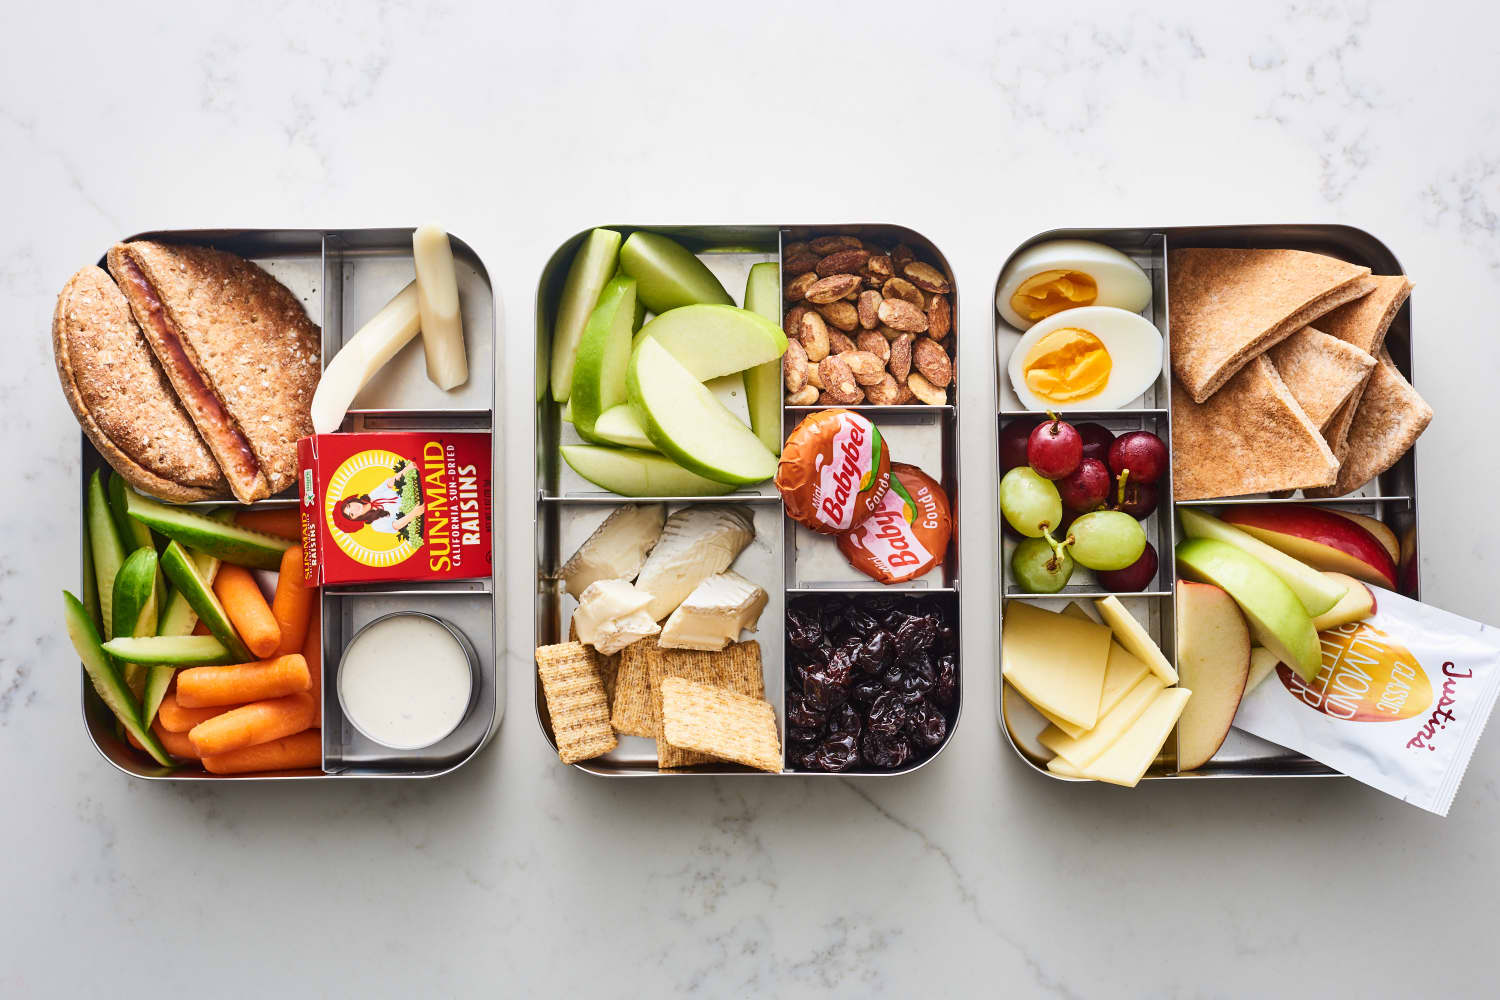 How to Make Packing School Lunch Easier | The Kitchn